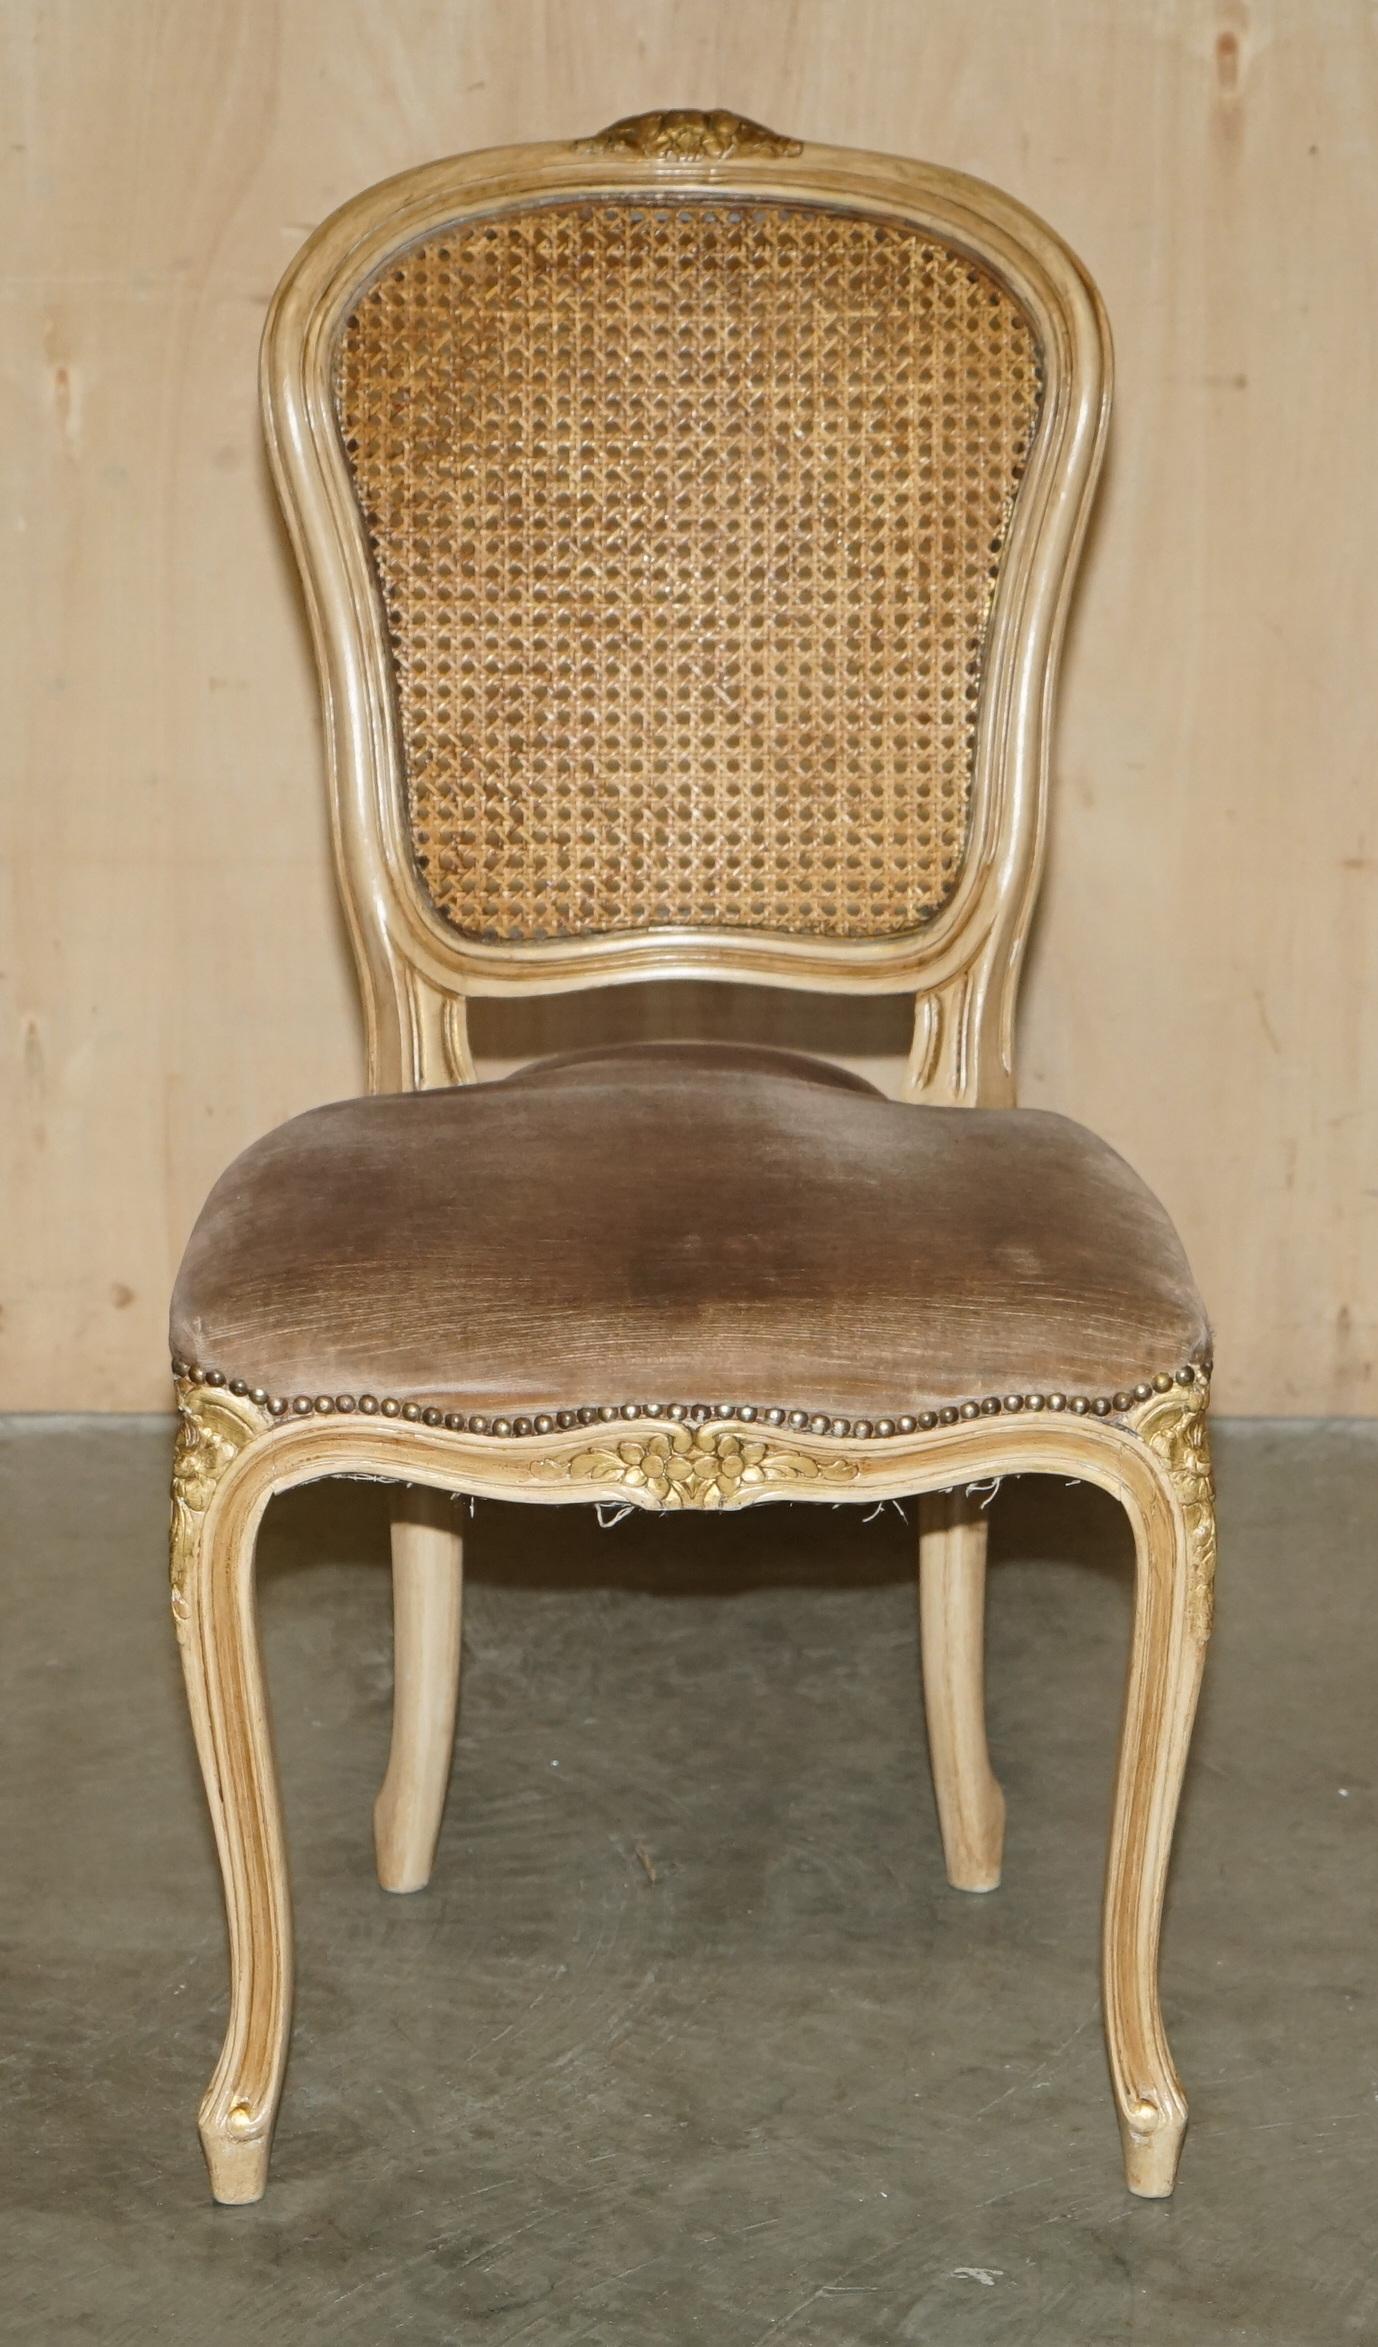 FOUR FINE ANTIQUE FRENCH BERGERE DiNING CHAIRS WITH PERIOD VELOUR UPHOLSTERY For Sale 4